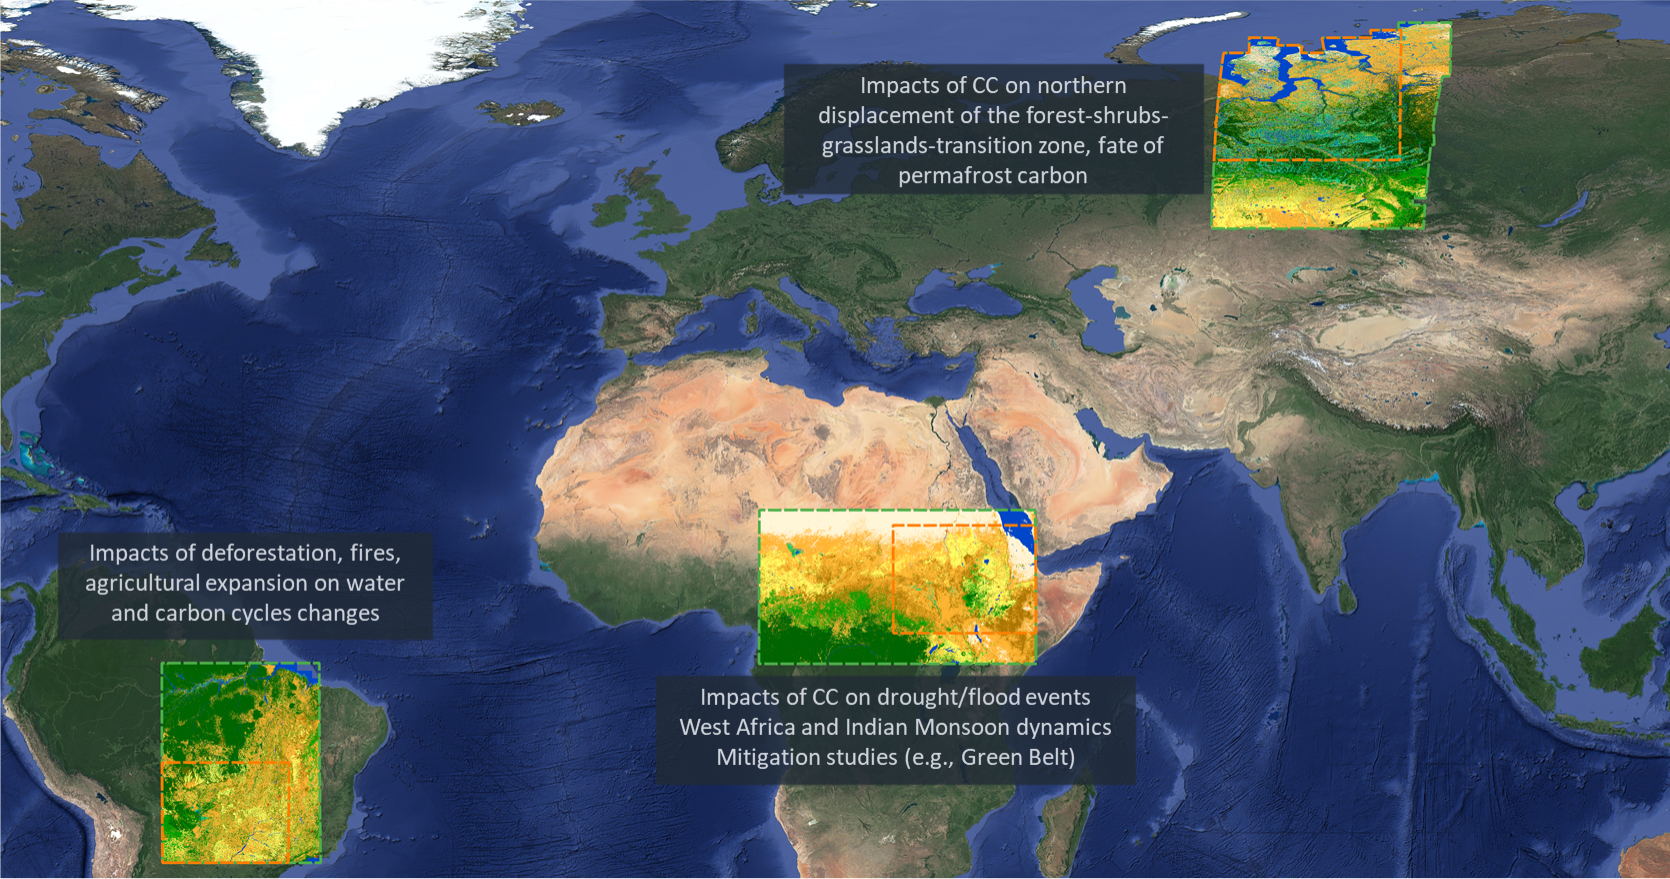 High resolution land cover maps from the ESA Climate Change Initiative for three sub-continental areas within Amazon, Africa and Siberia (10m resolution greenbox; 30m resolution orange box).